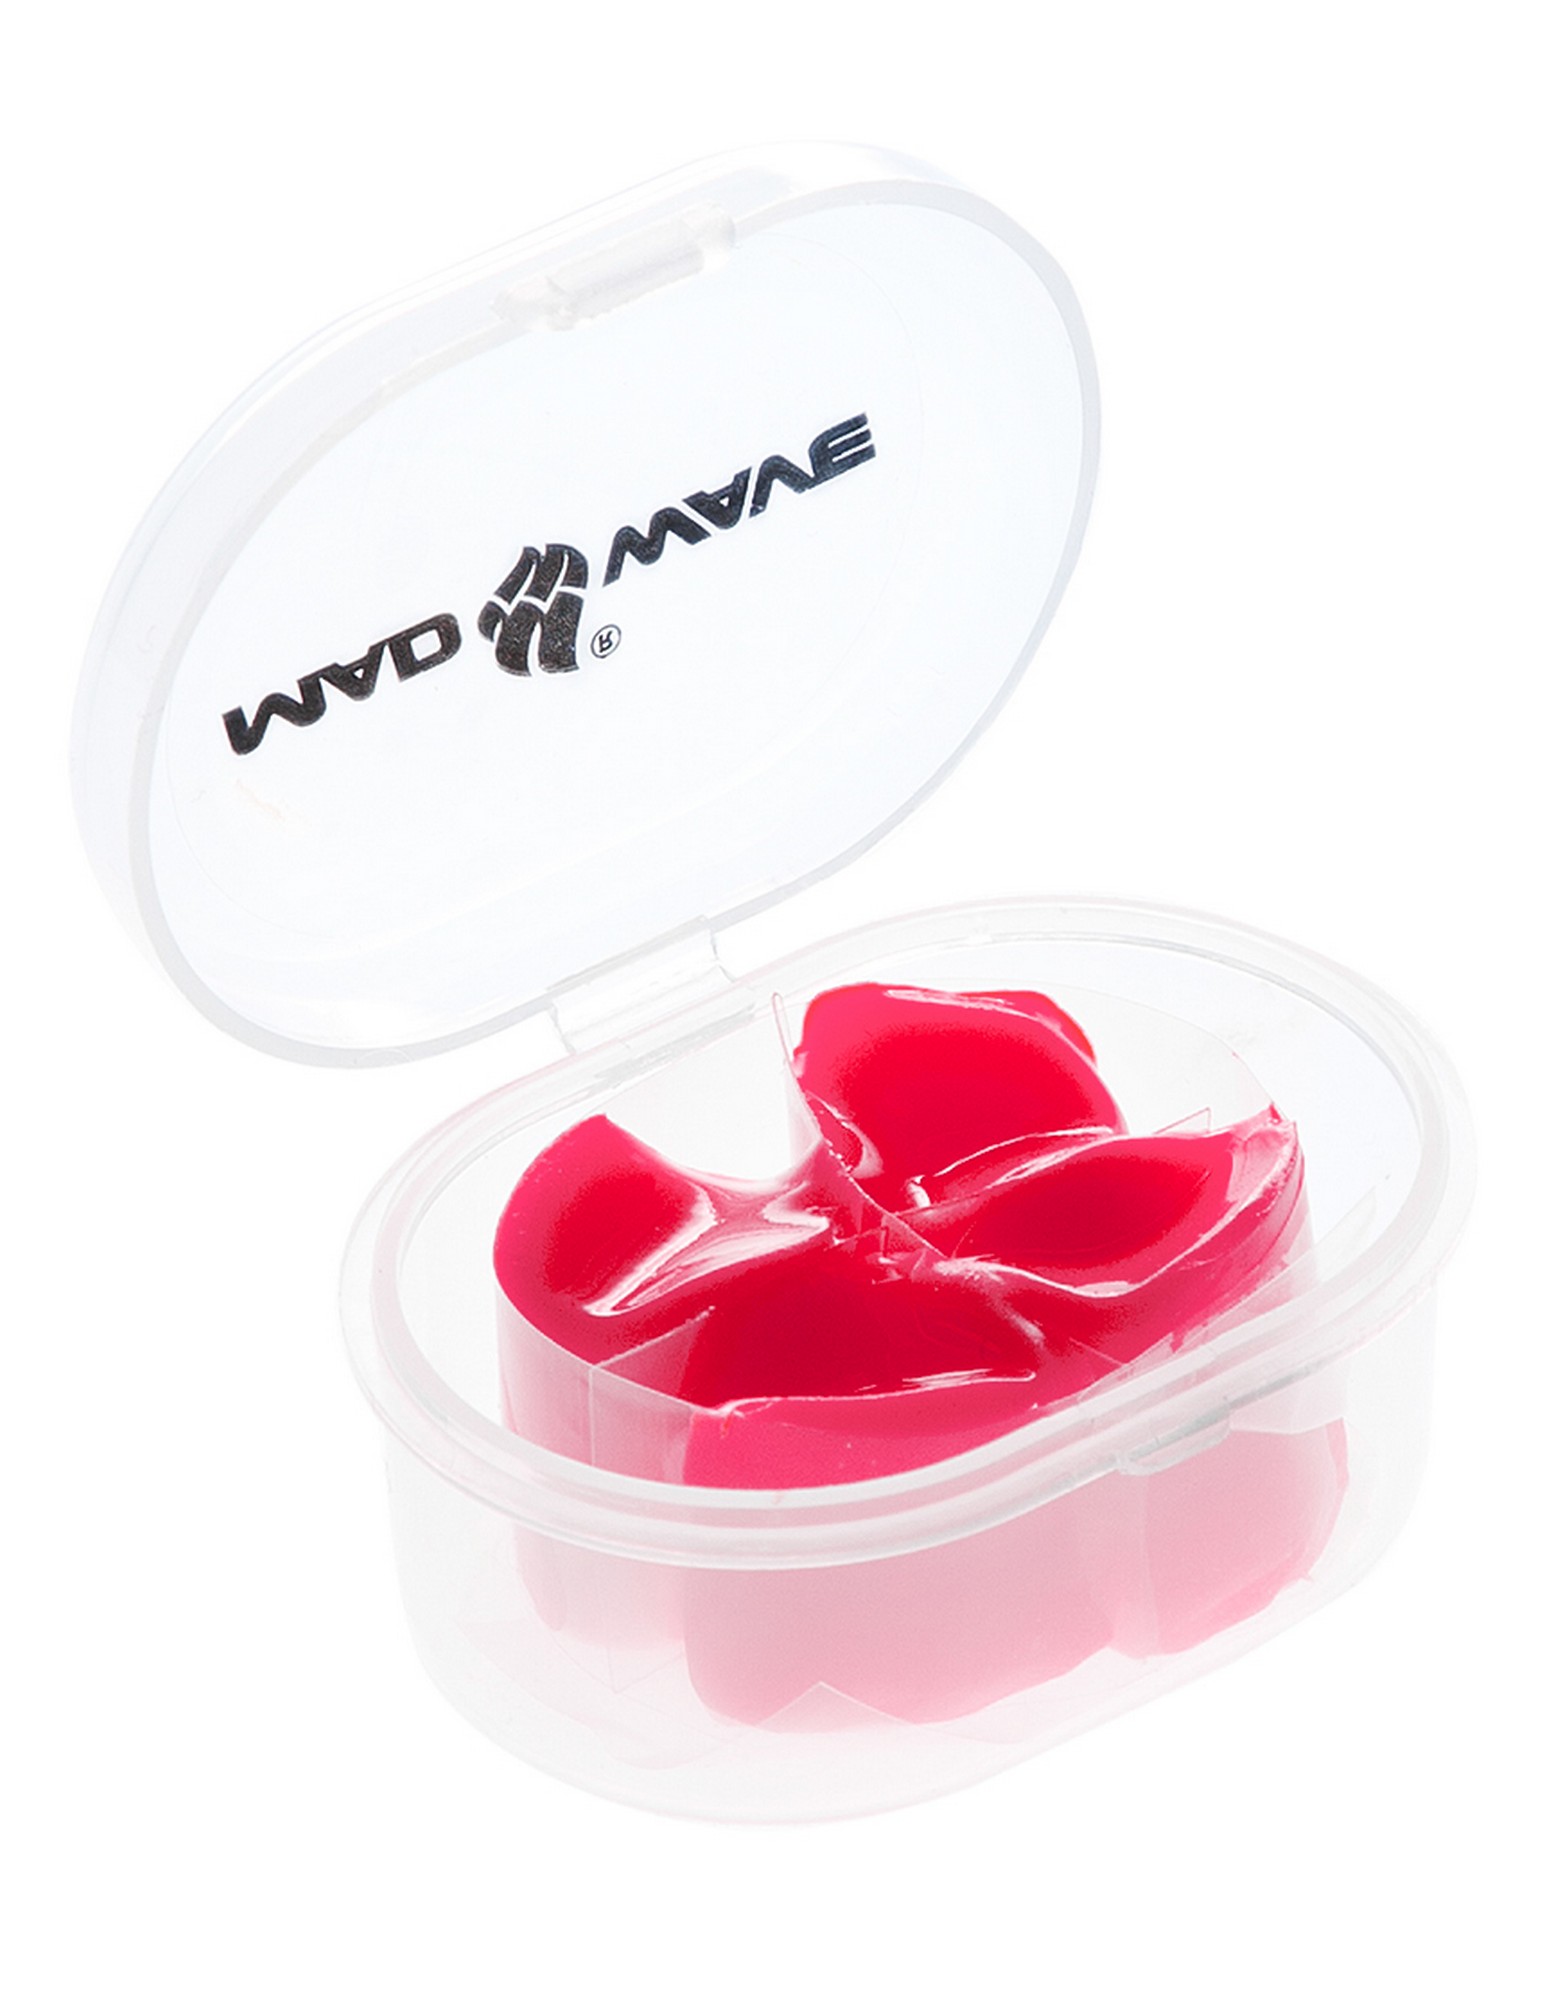   Mad Wave Ear plugs silicone M0714 01 0 11W